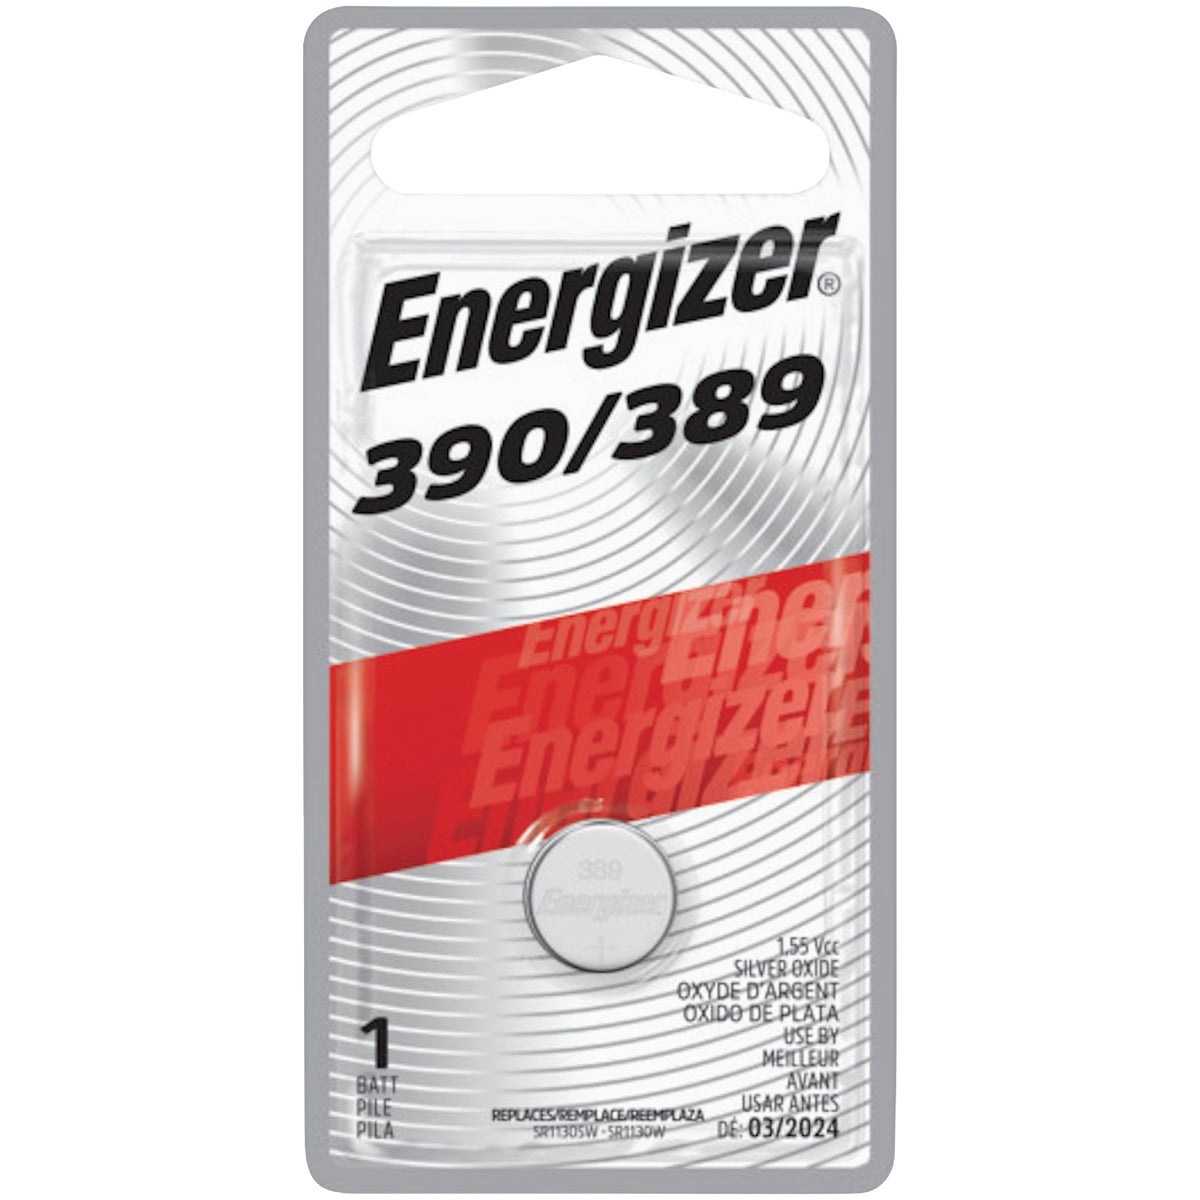 Energizer 389 Silver Oxide Button Cell Battery